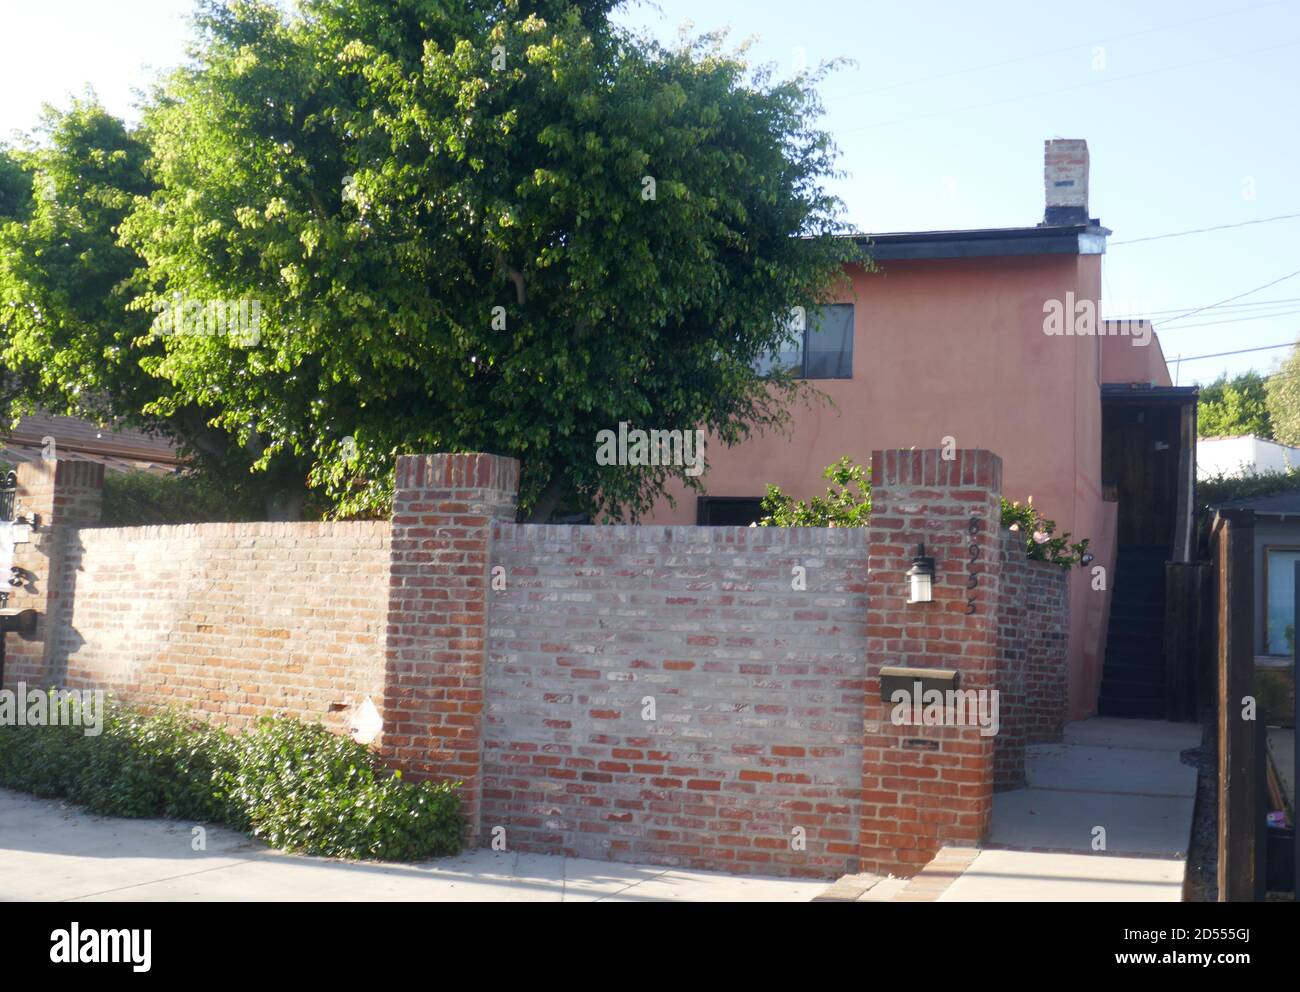 West Hollywood, California, USA 12th October 2020 A general view of atmosphere of actress Linda Hamilton, actress Jennifer Jason Leigh, actress Donna Dixon, actress Glynnis O'Connor's former home at 8955 Norma Place on October 12, 2020 in West Hollywood, California, USA. Photo by Barry King/Alamy Stock Photo Stock Photo